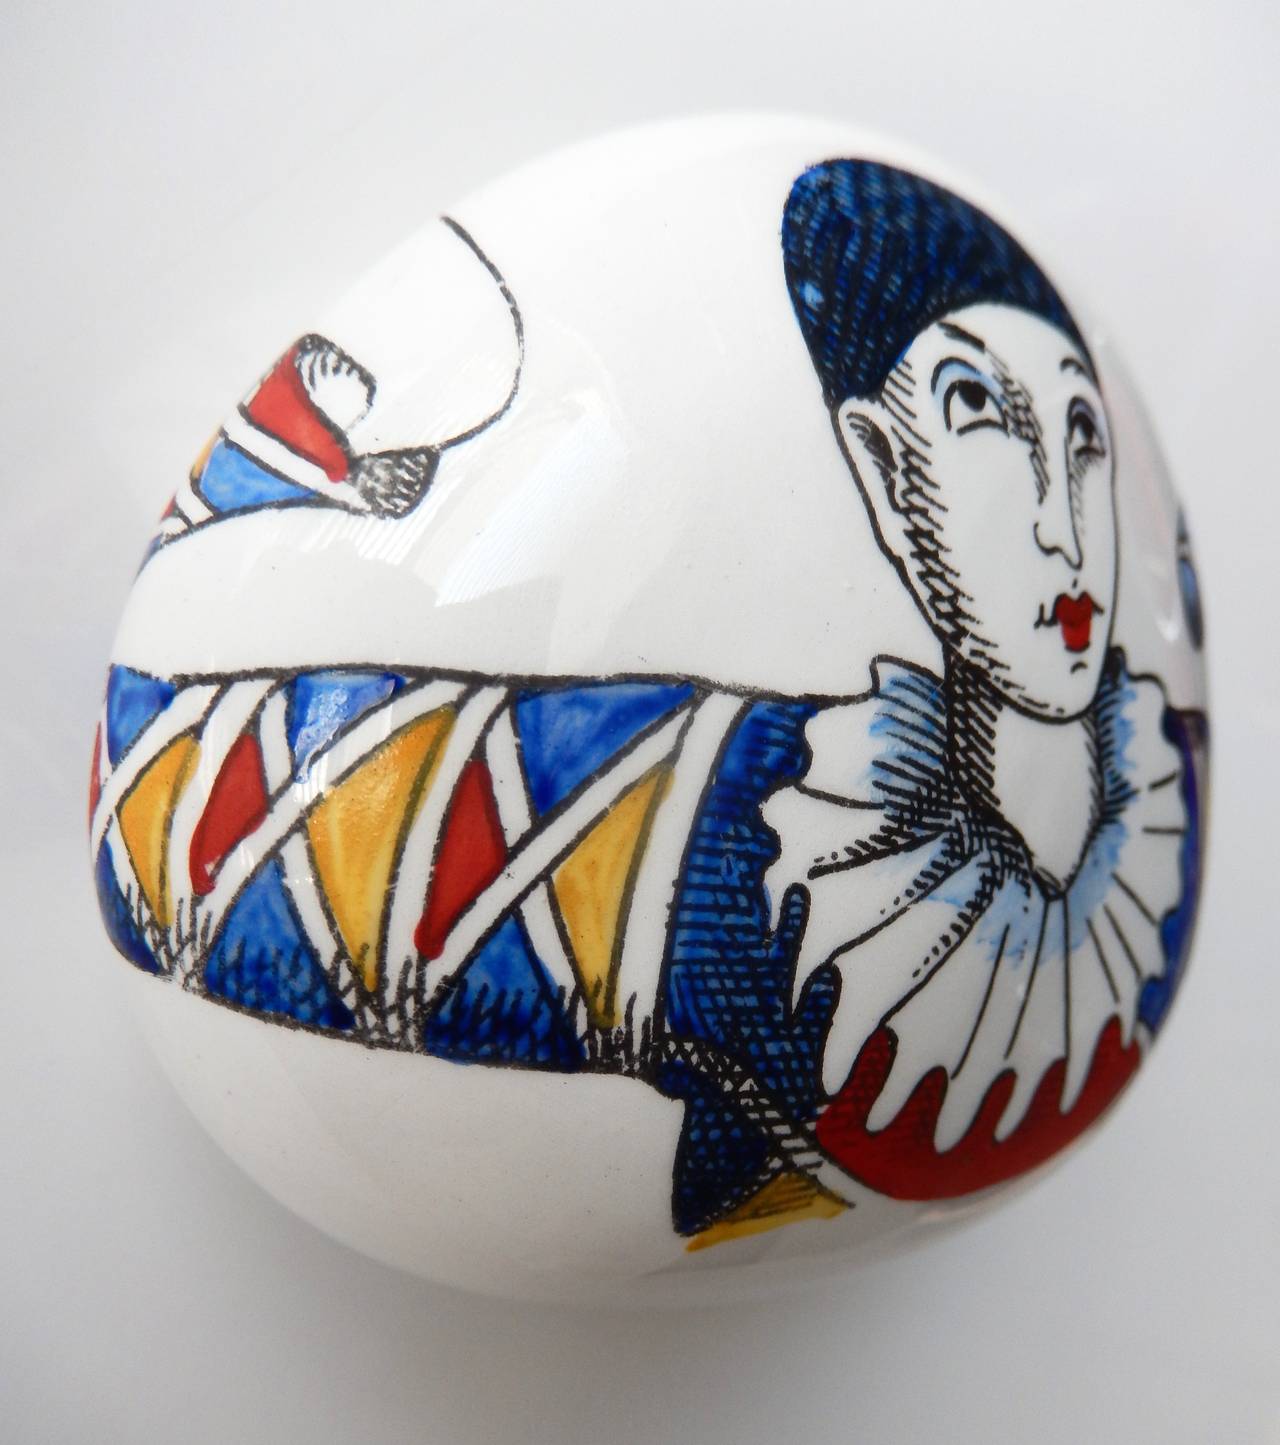 An oval shaped, porcelain paperweight by Piero Fornasetti of a Harlequin or French Pierrot figure. Commedia dell'arte characters are a popular subject in Fornasetti's work. Marked. Beautiful, brightly-colored graphic design. 

(Similar